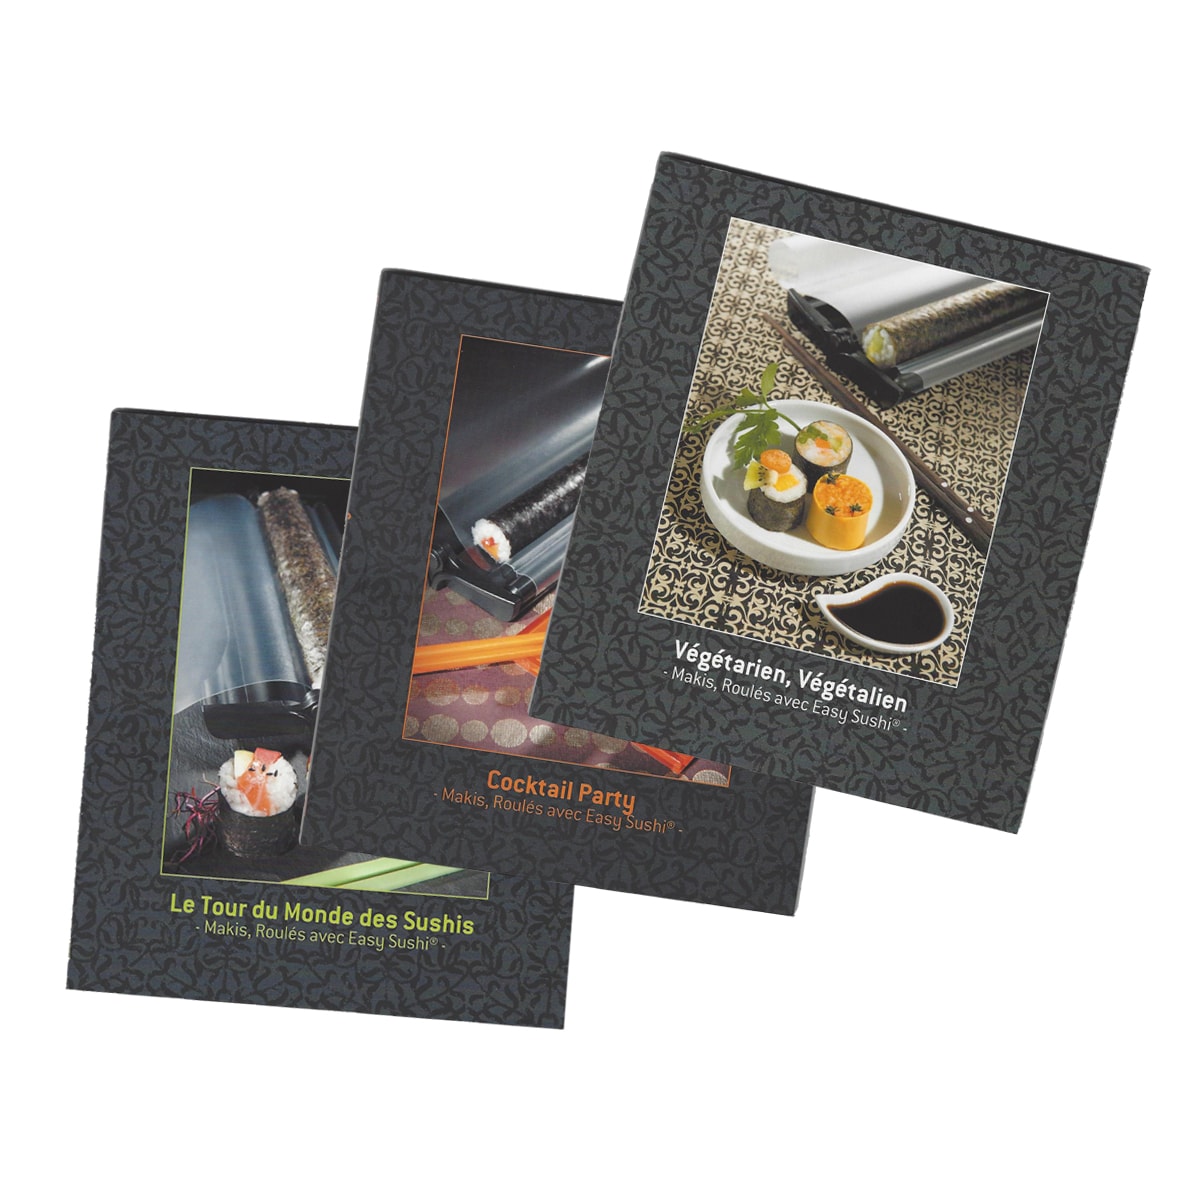 Easy-Sushi-pack-3-libros